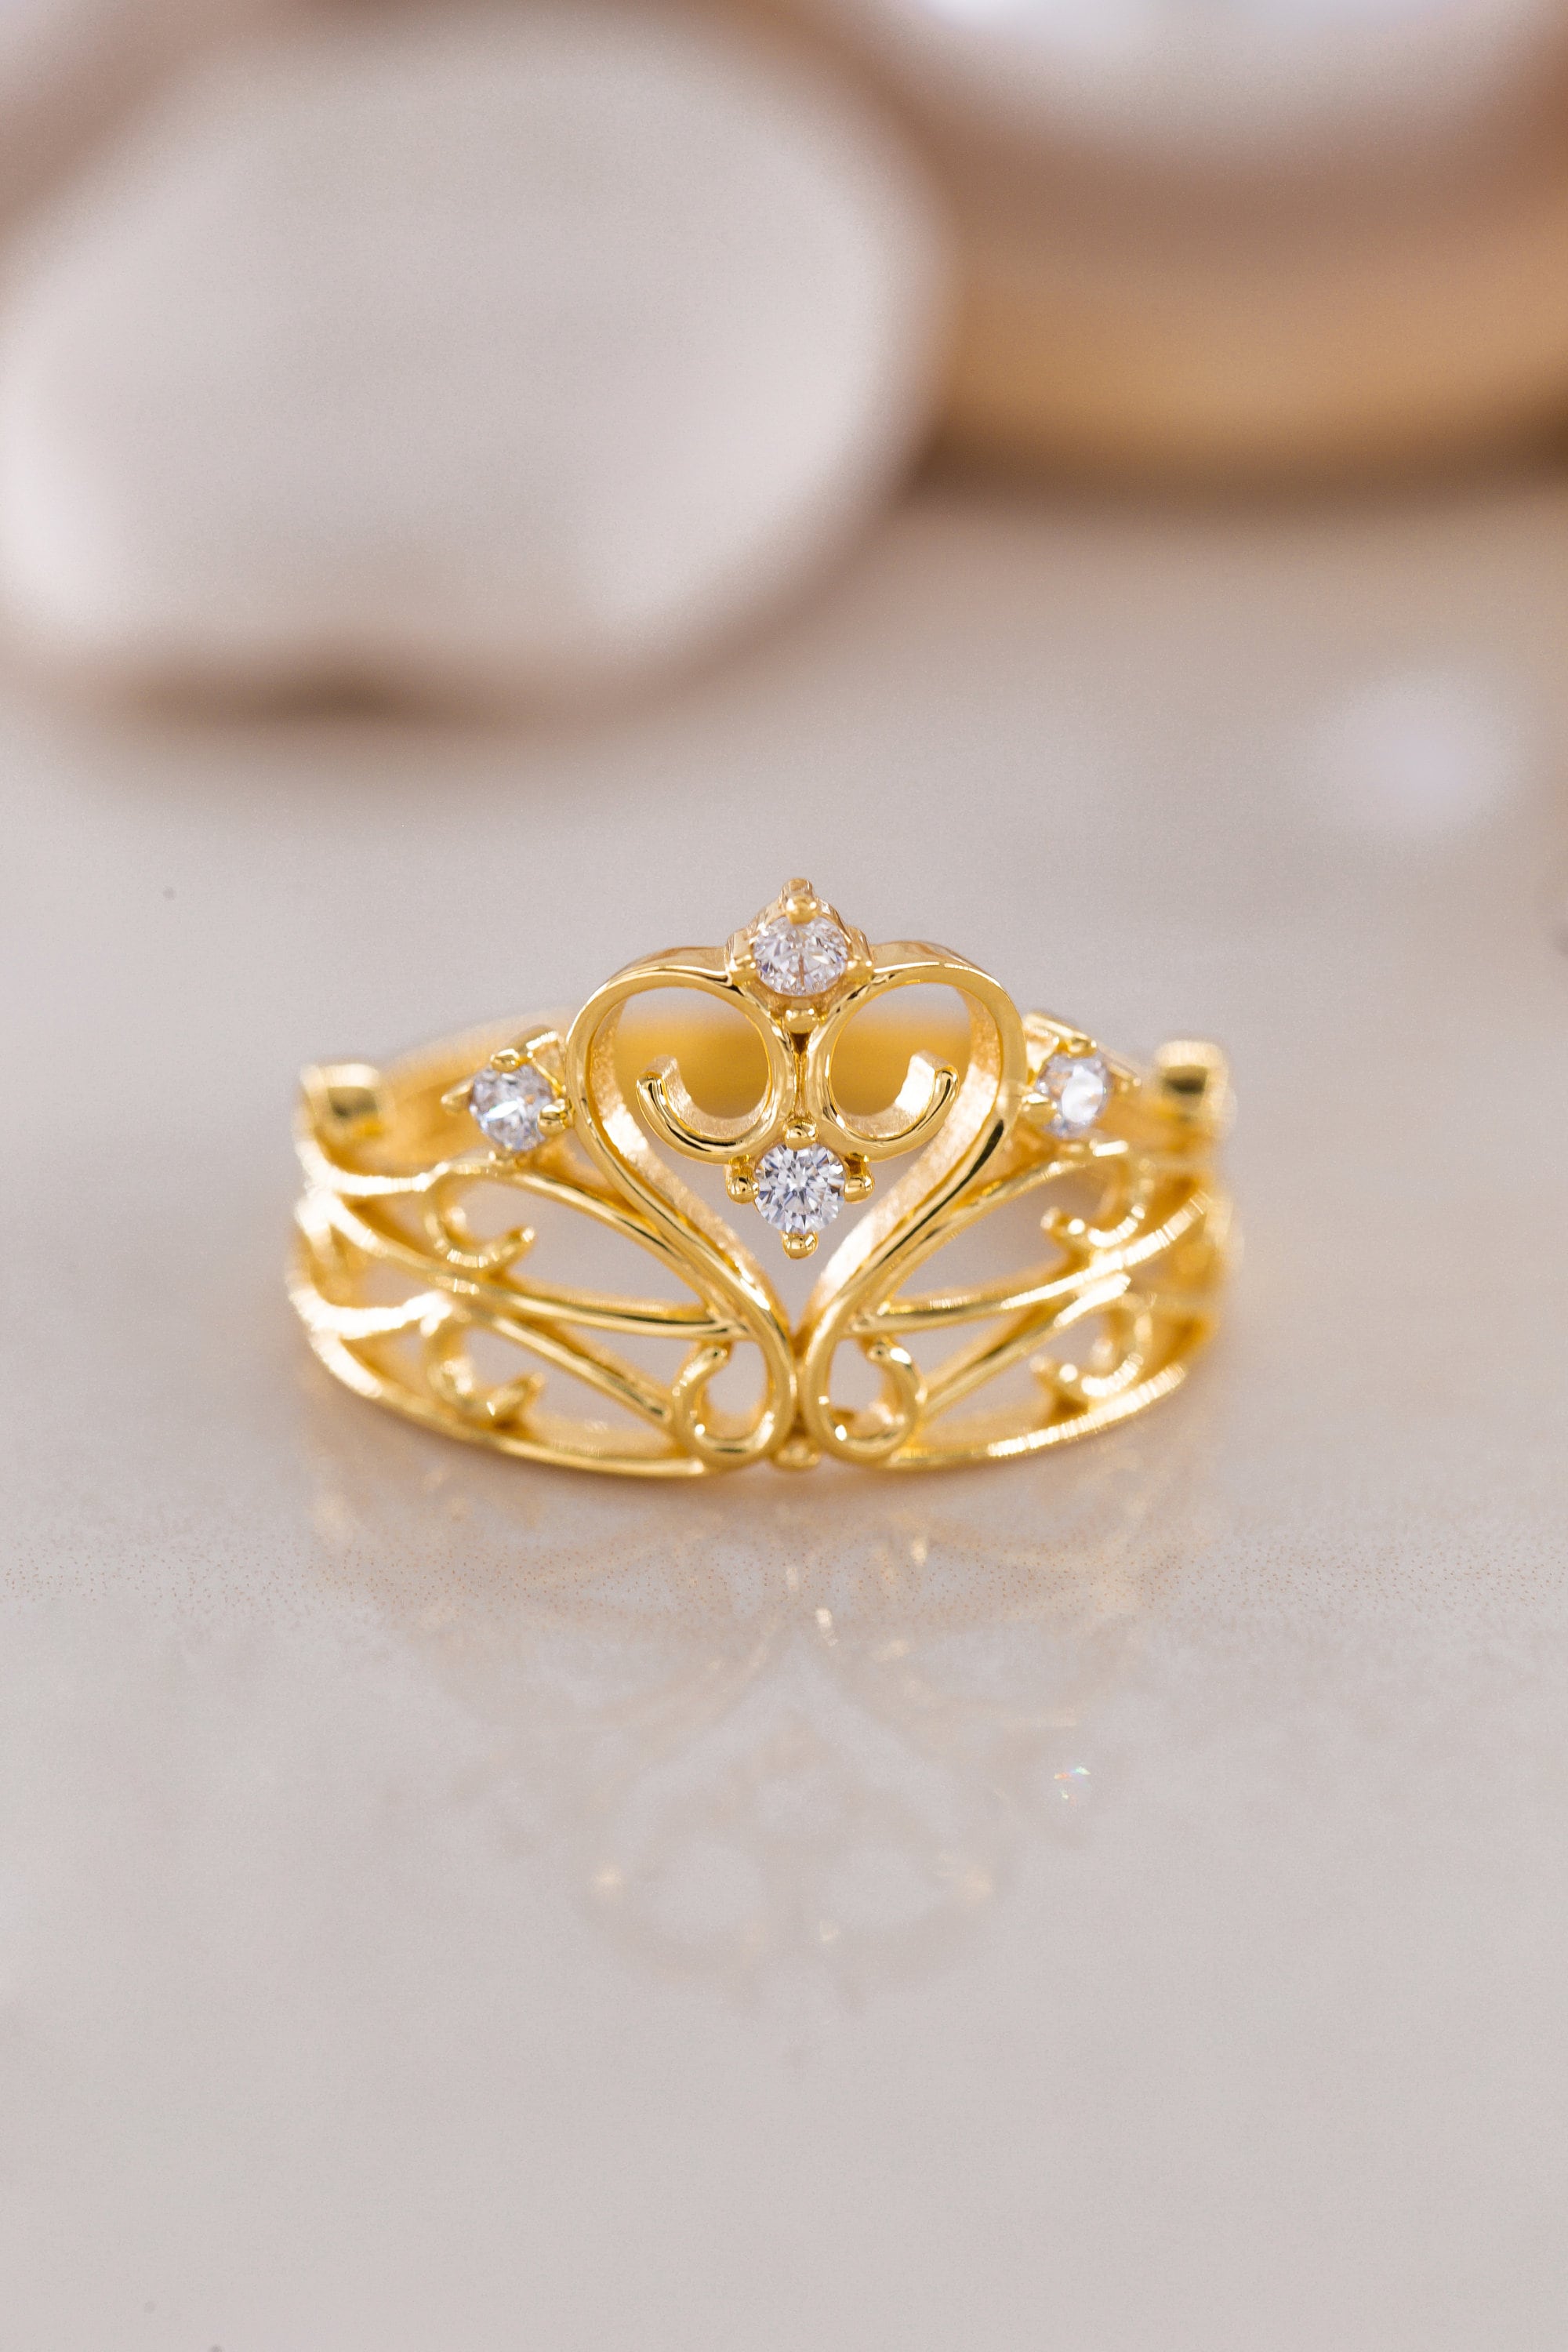 14K Golden Princess Crown Ring 925 Sterling Silver Handmade Crystal Crown Ring, Crystal Crown Ring, Royal Queen Unique Ring, Rings for Women